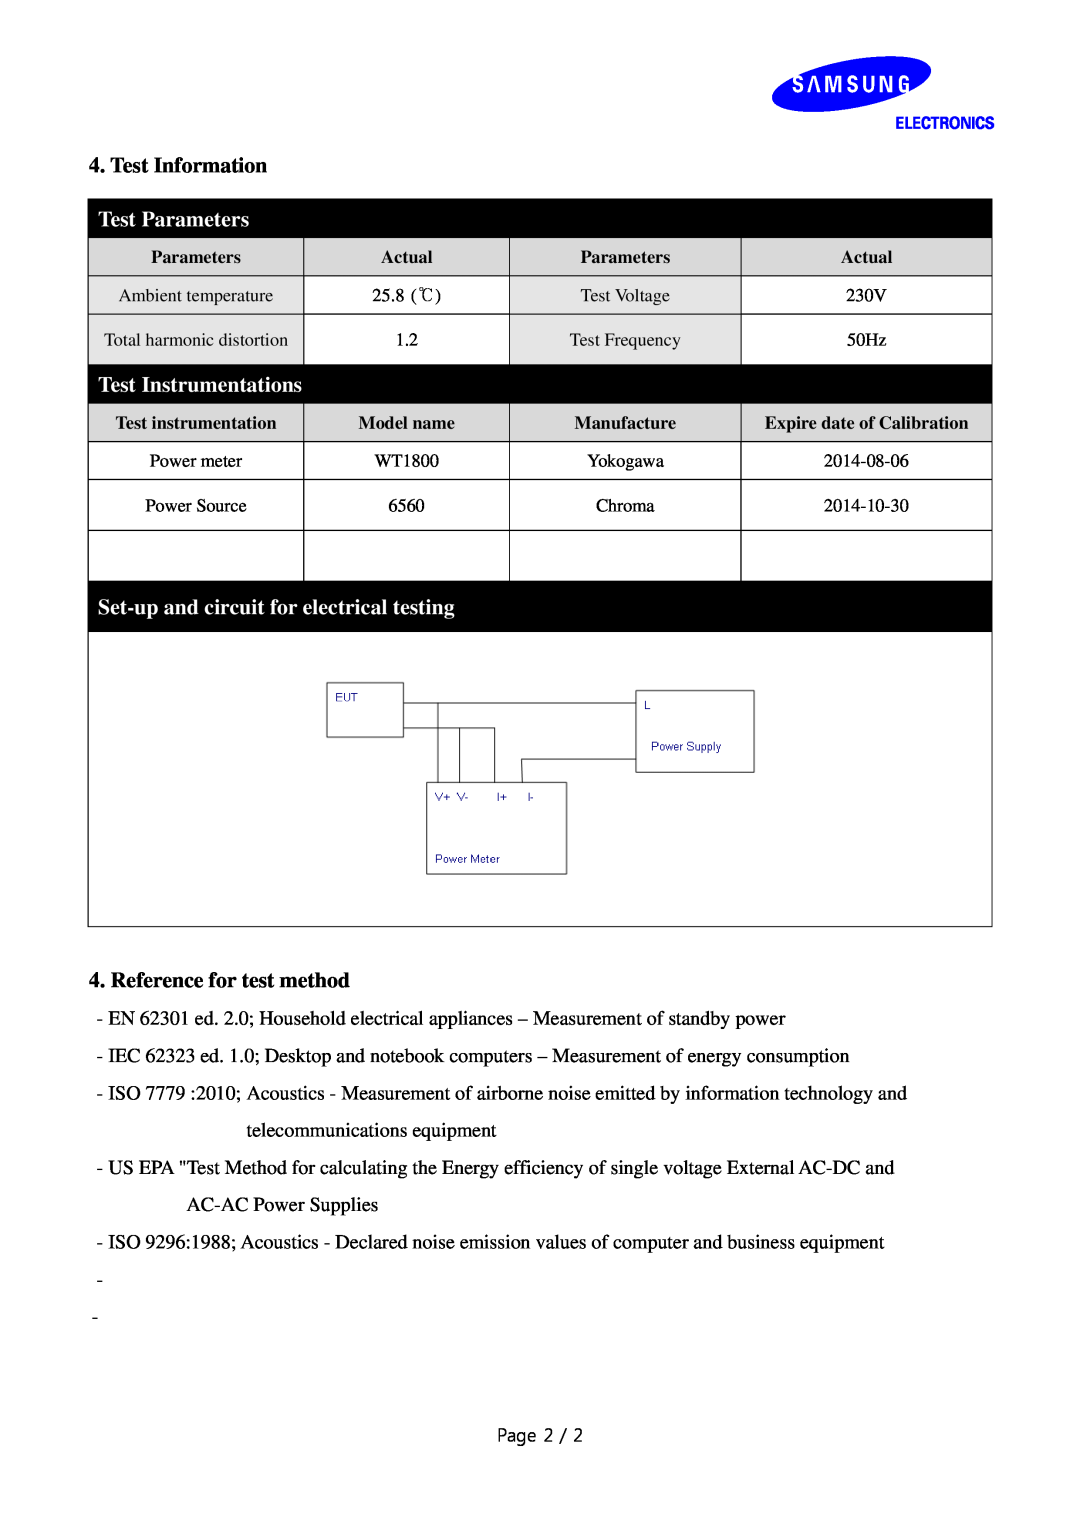 Samsung LF00FNXPFBZXCI Test Information, Test Parameters, Test Instrumentations, Set-up and circuit for electrical testing 